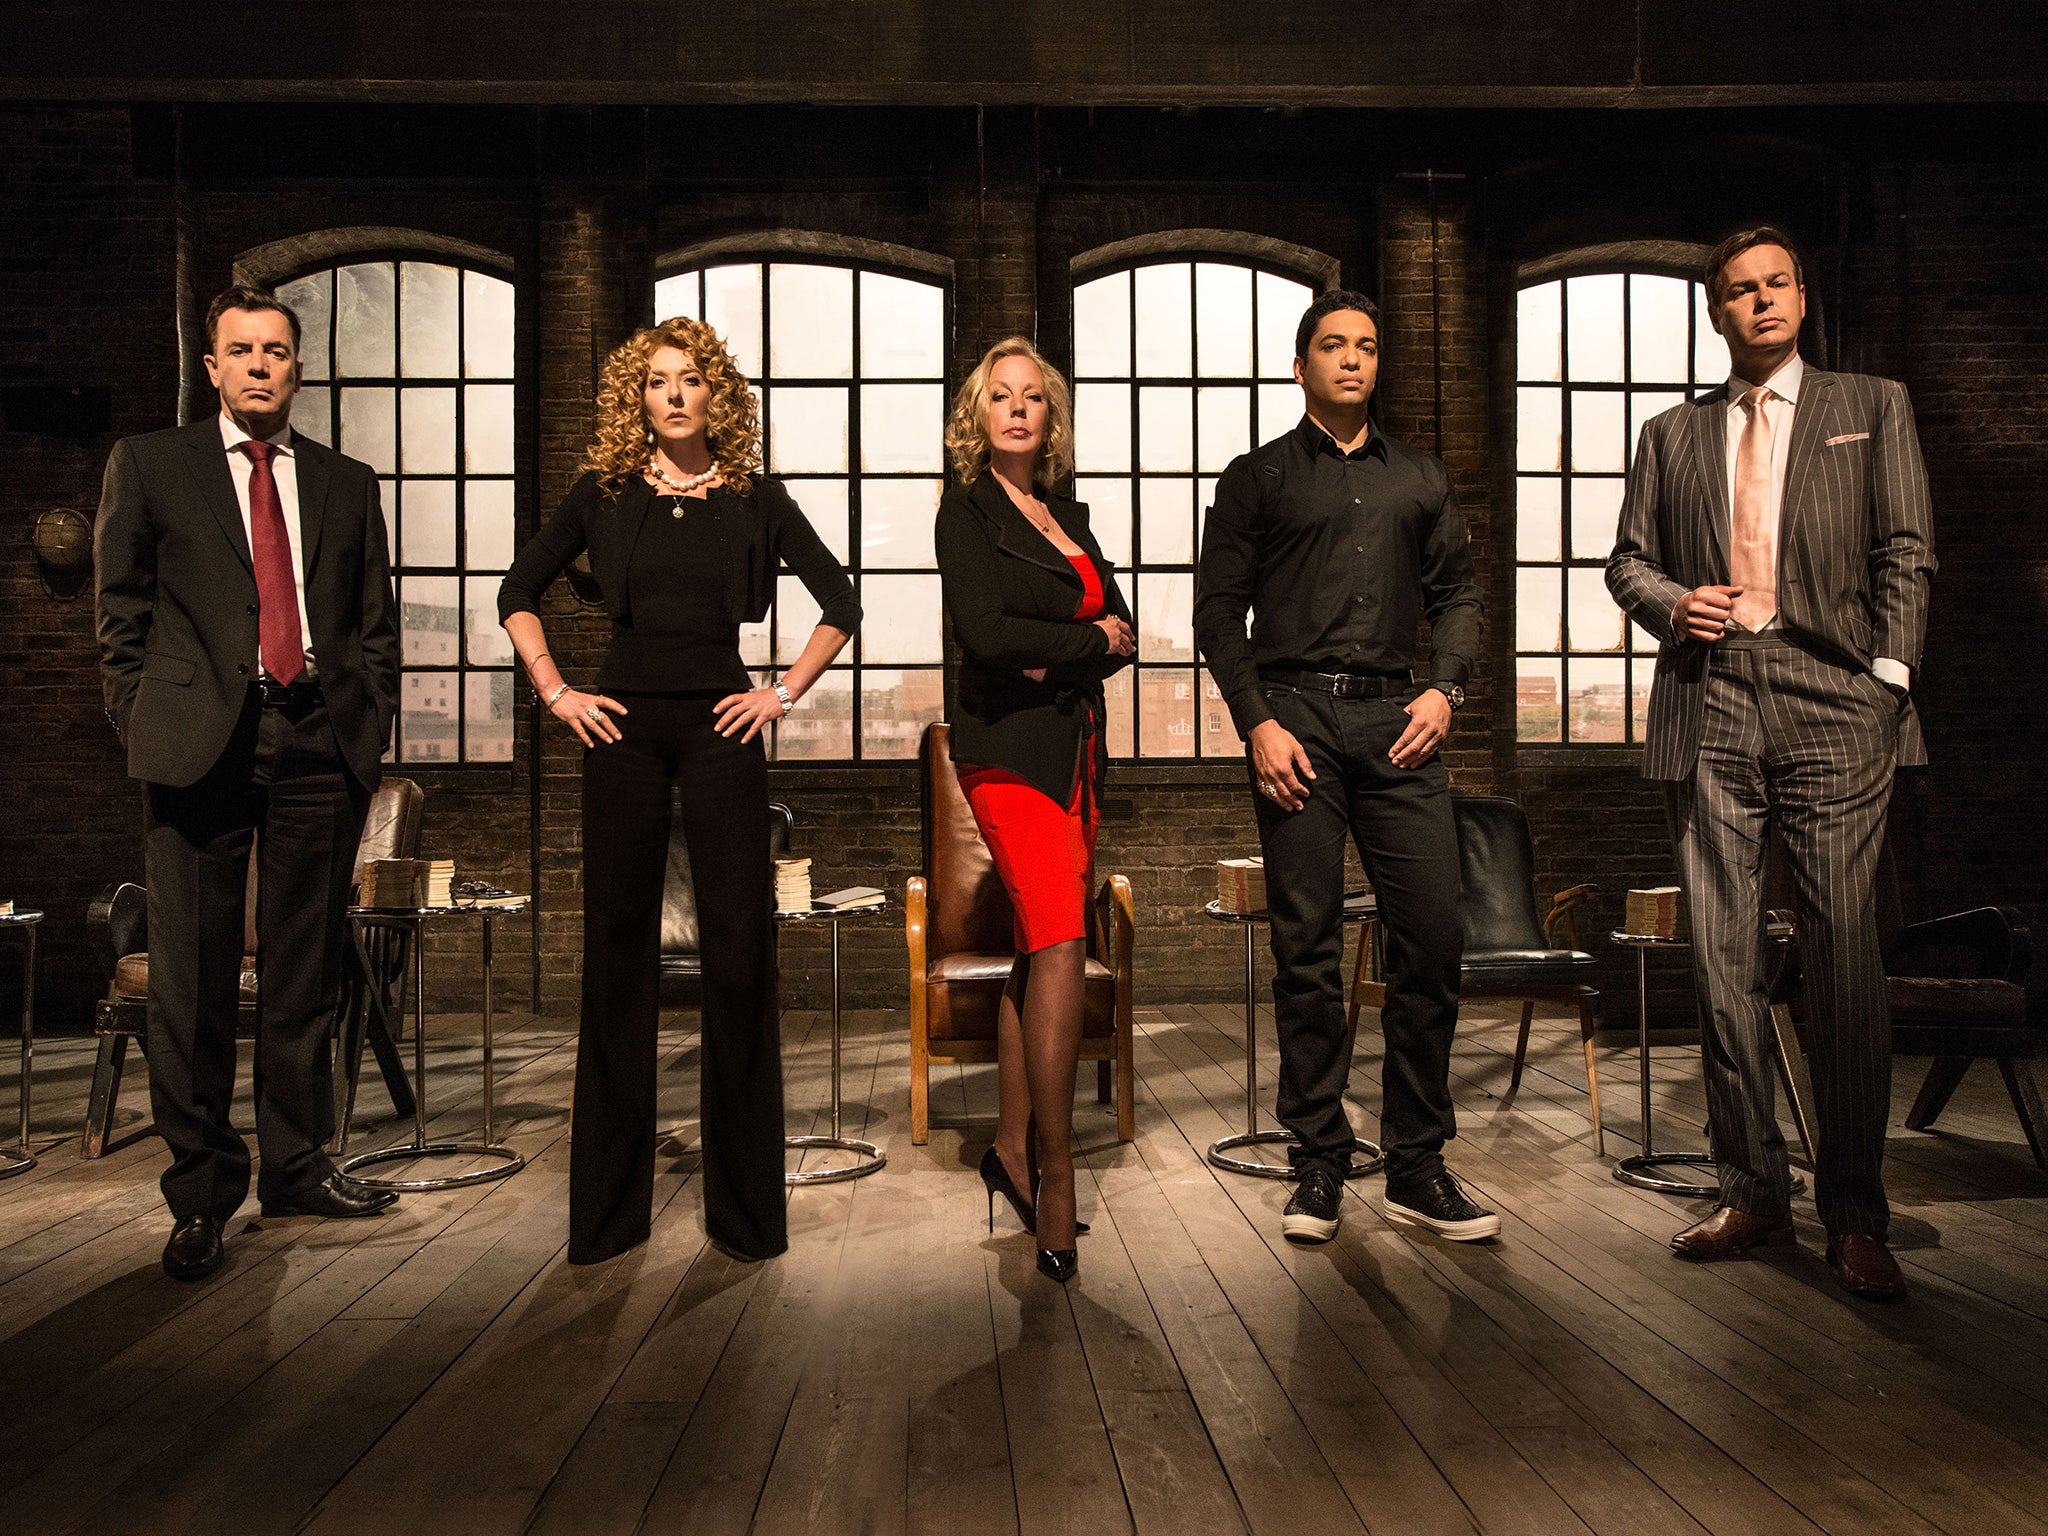 Dragons’ Den has returned to our screens after a mid-series break